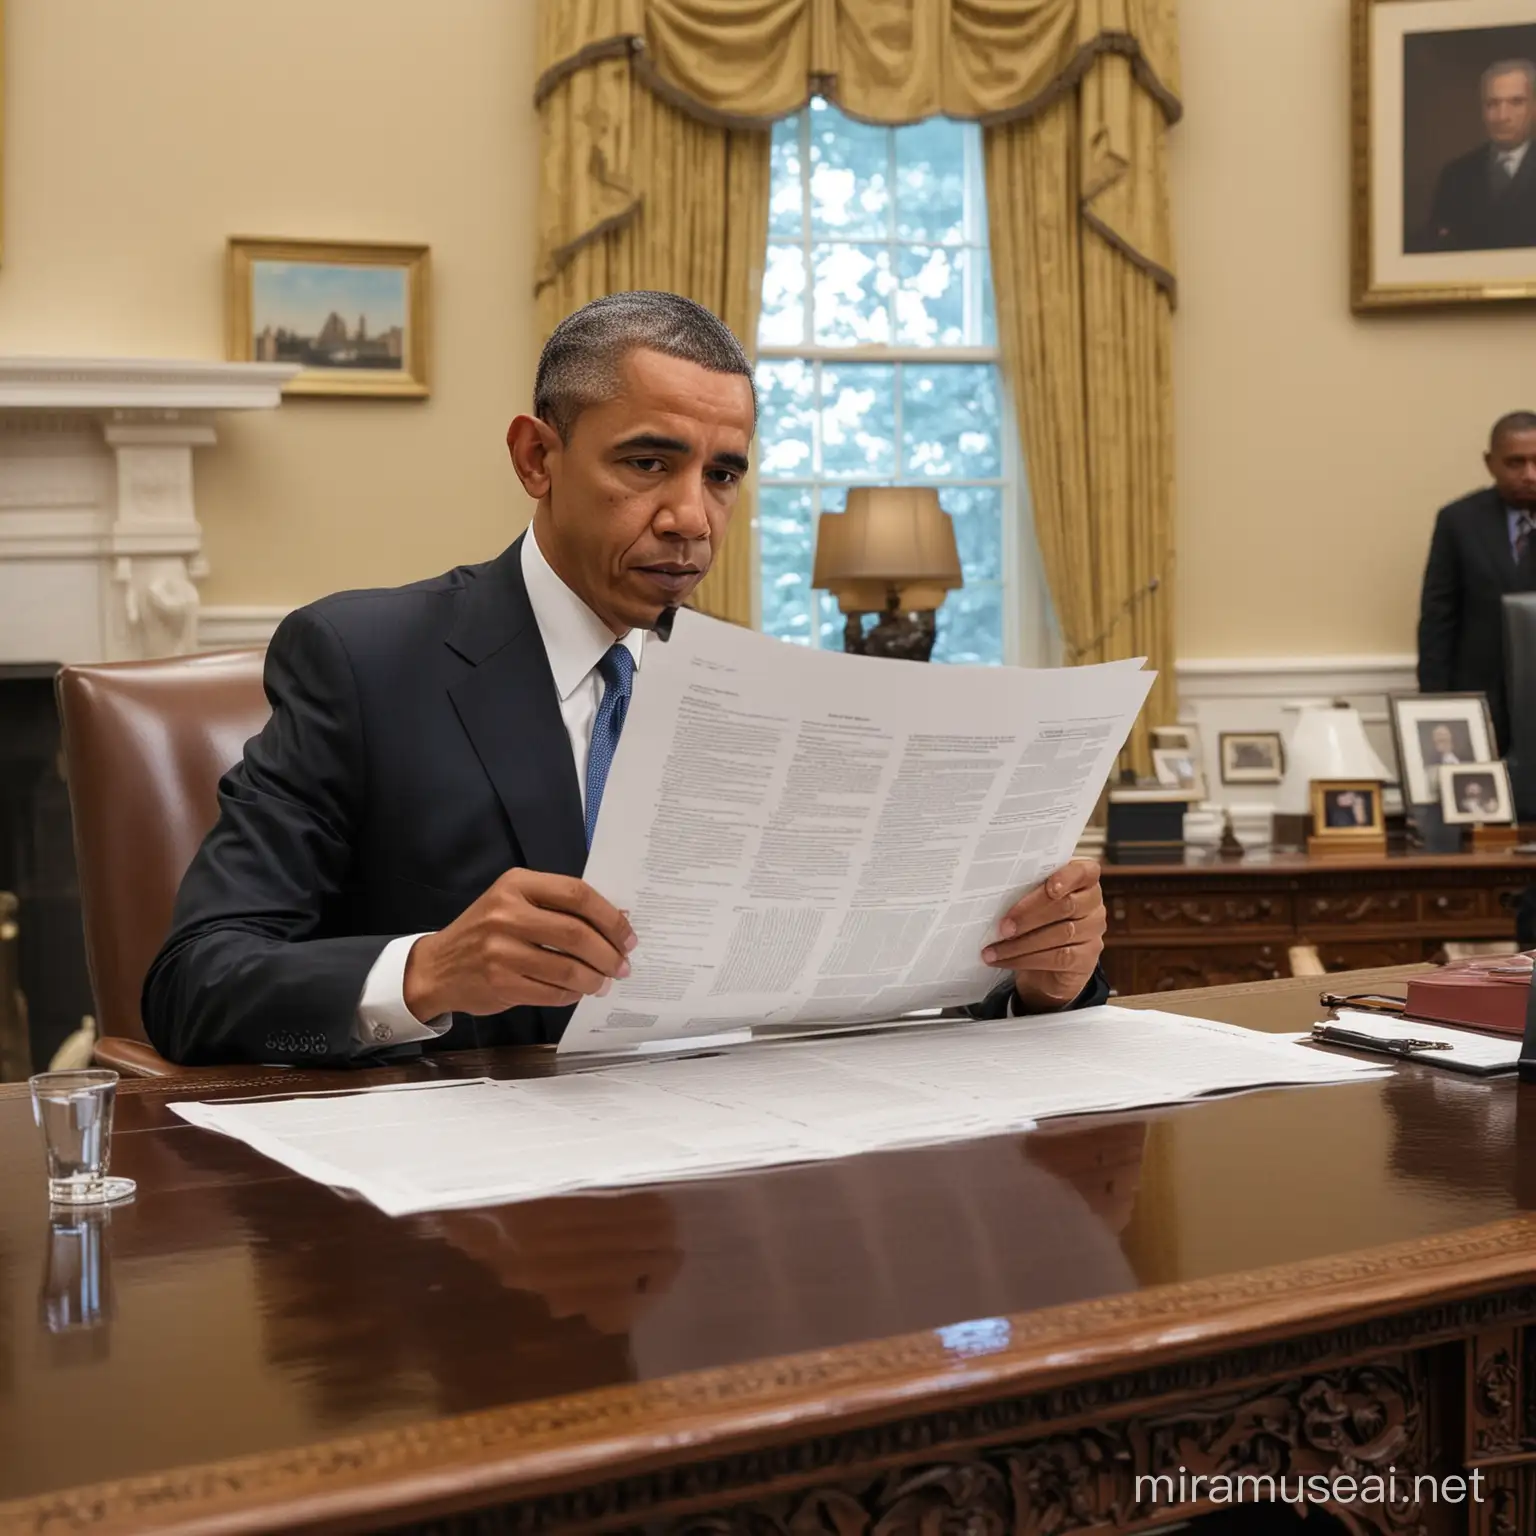 obama sitting in his office looking at paper analyzing something